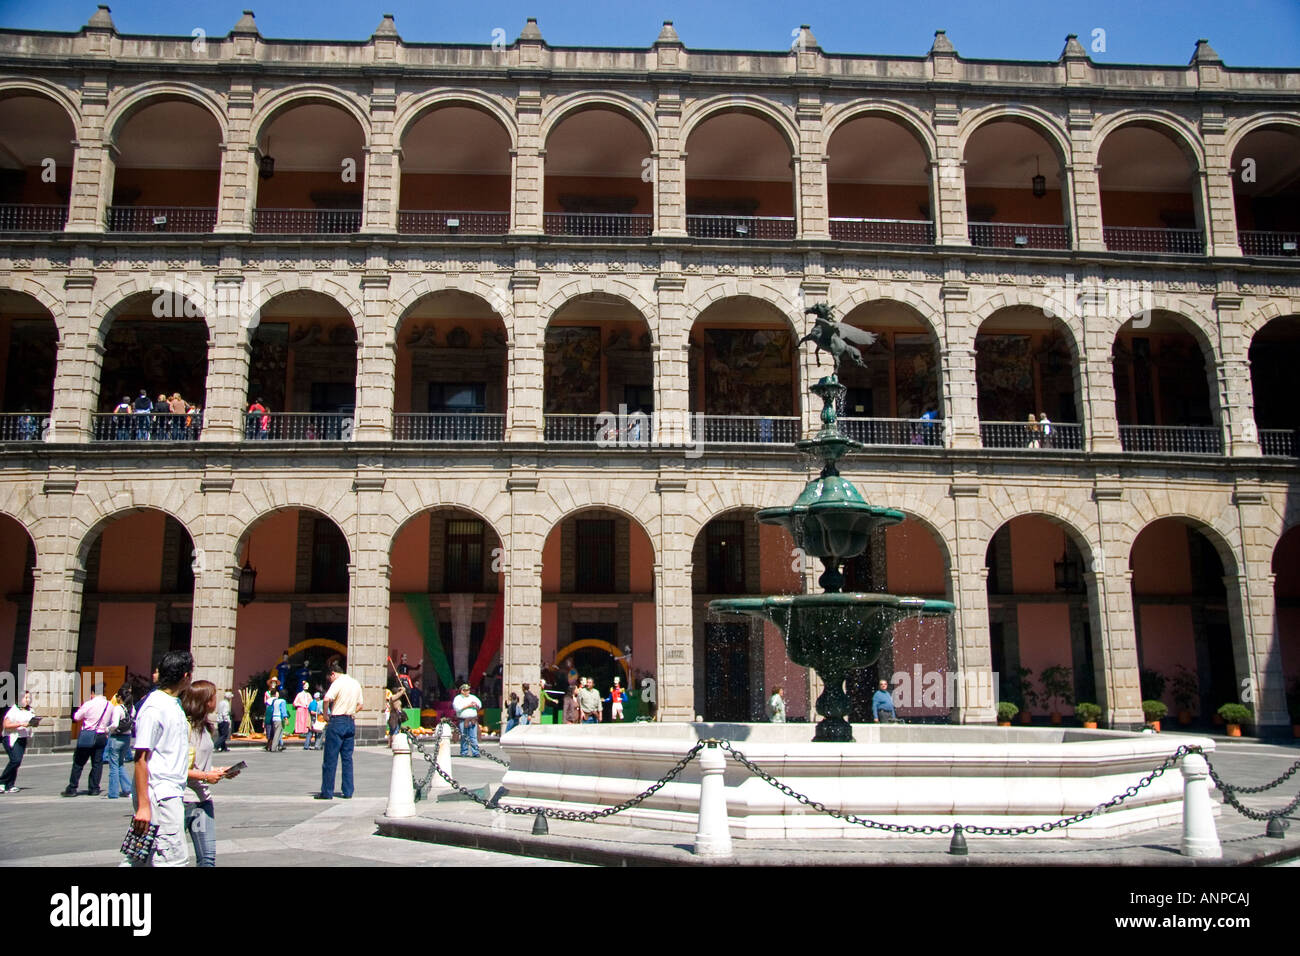 The fountain in the courtyard of the National Palace in Mexico City Mexico Stock Photo